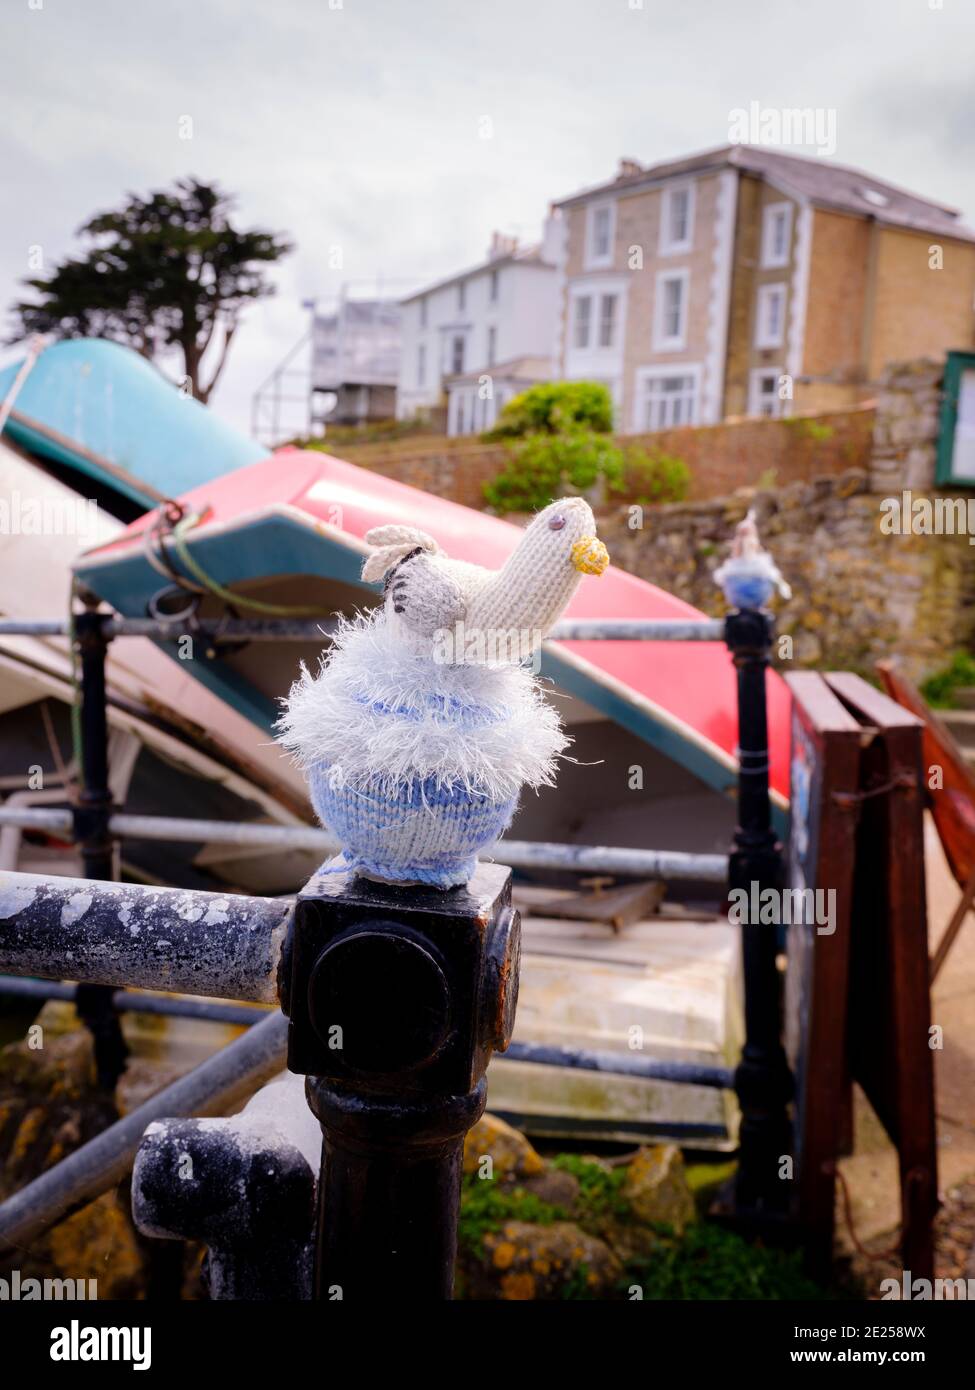 Knitted seagulls atop railings at Seaview on the Isle of Wight Stock Photo